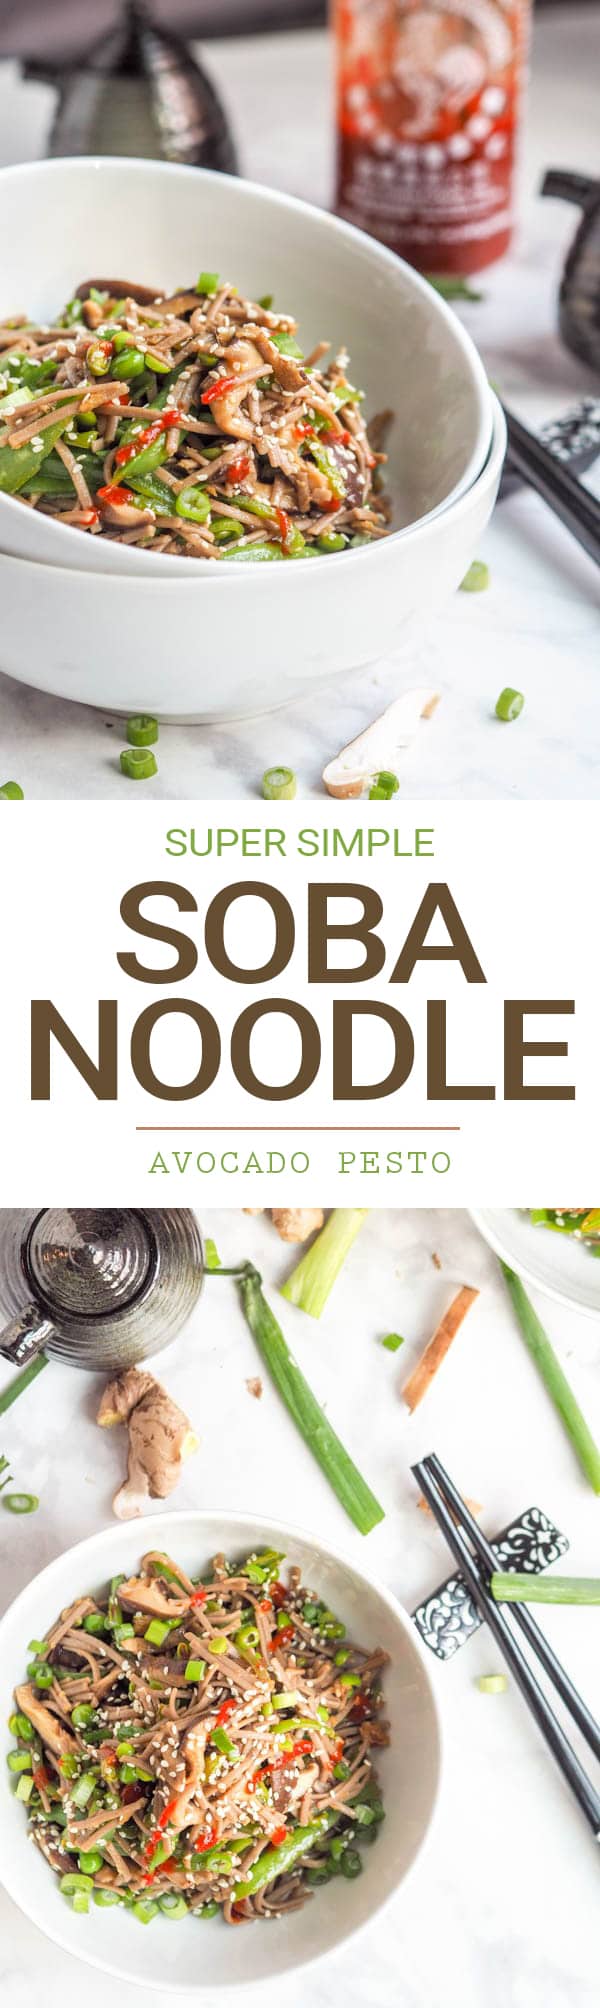 Super simple shiitake mushrooms and sugar snap pea vegan soba noodle stir fry. Gluten-Free and ready in 30 minutes. One of the easiest vegan soba noodle recipes ever for your Asian themed dinner nights.